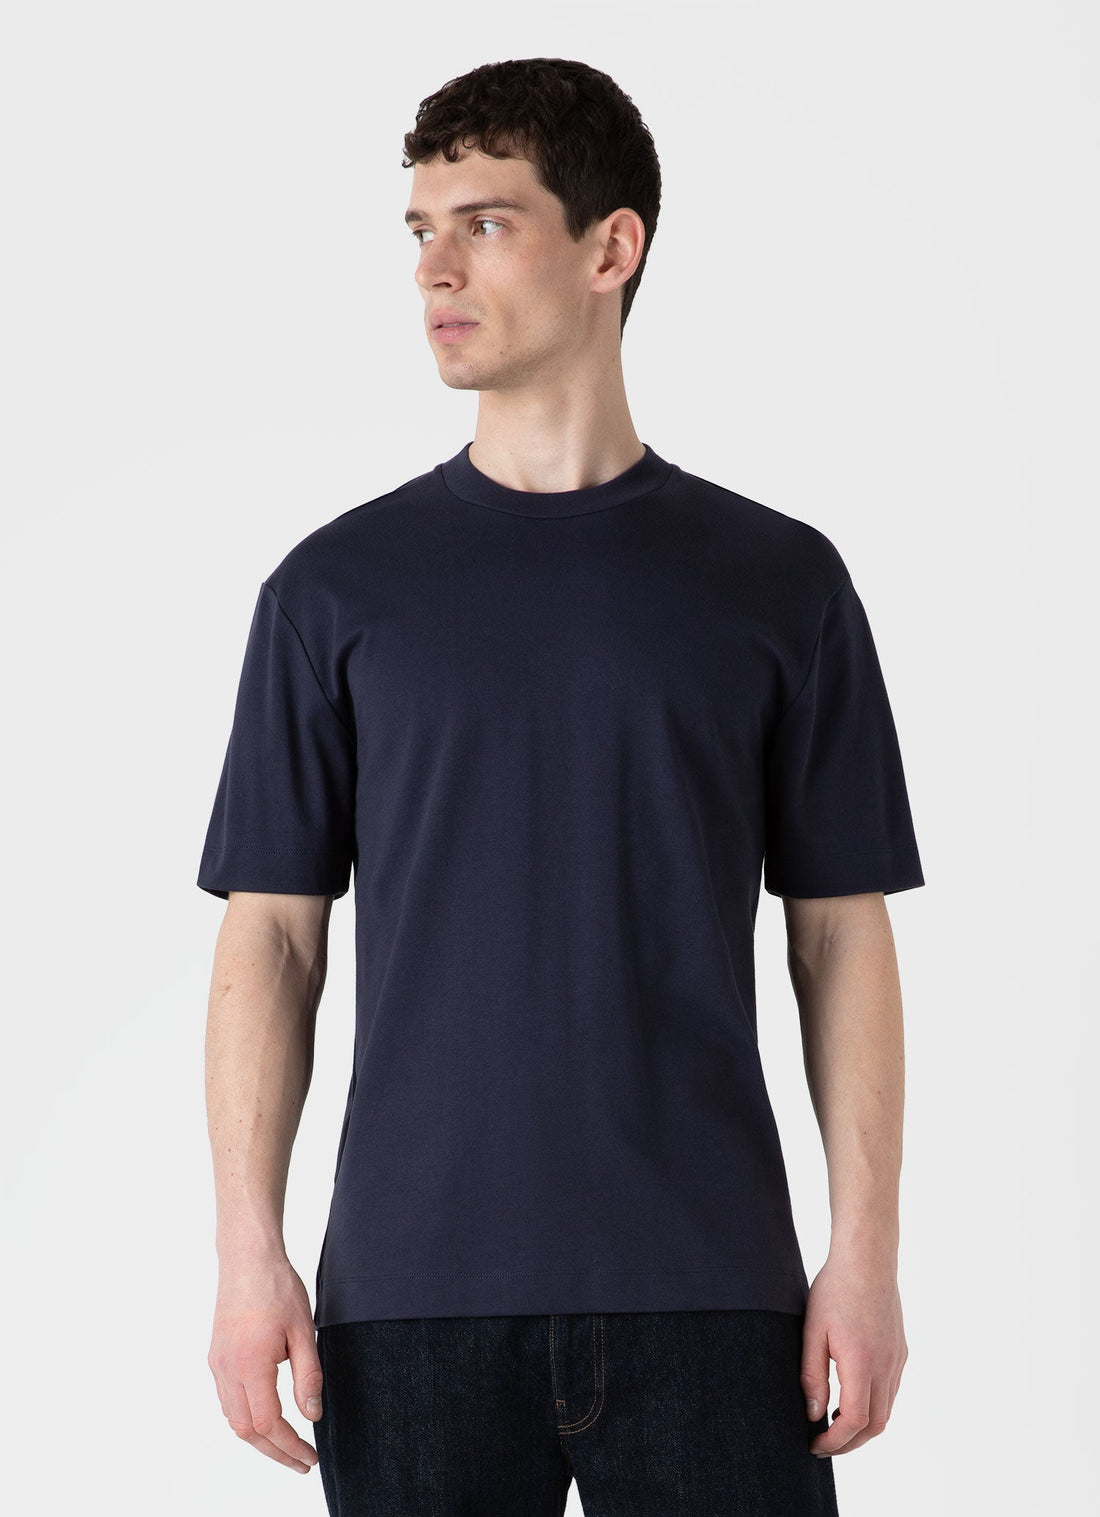 Men's Relaxed Fit Heavyweight T-shirt in Navy